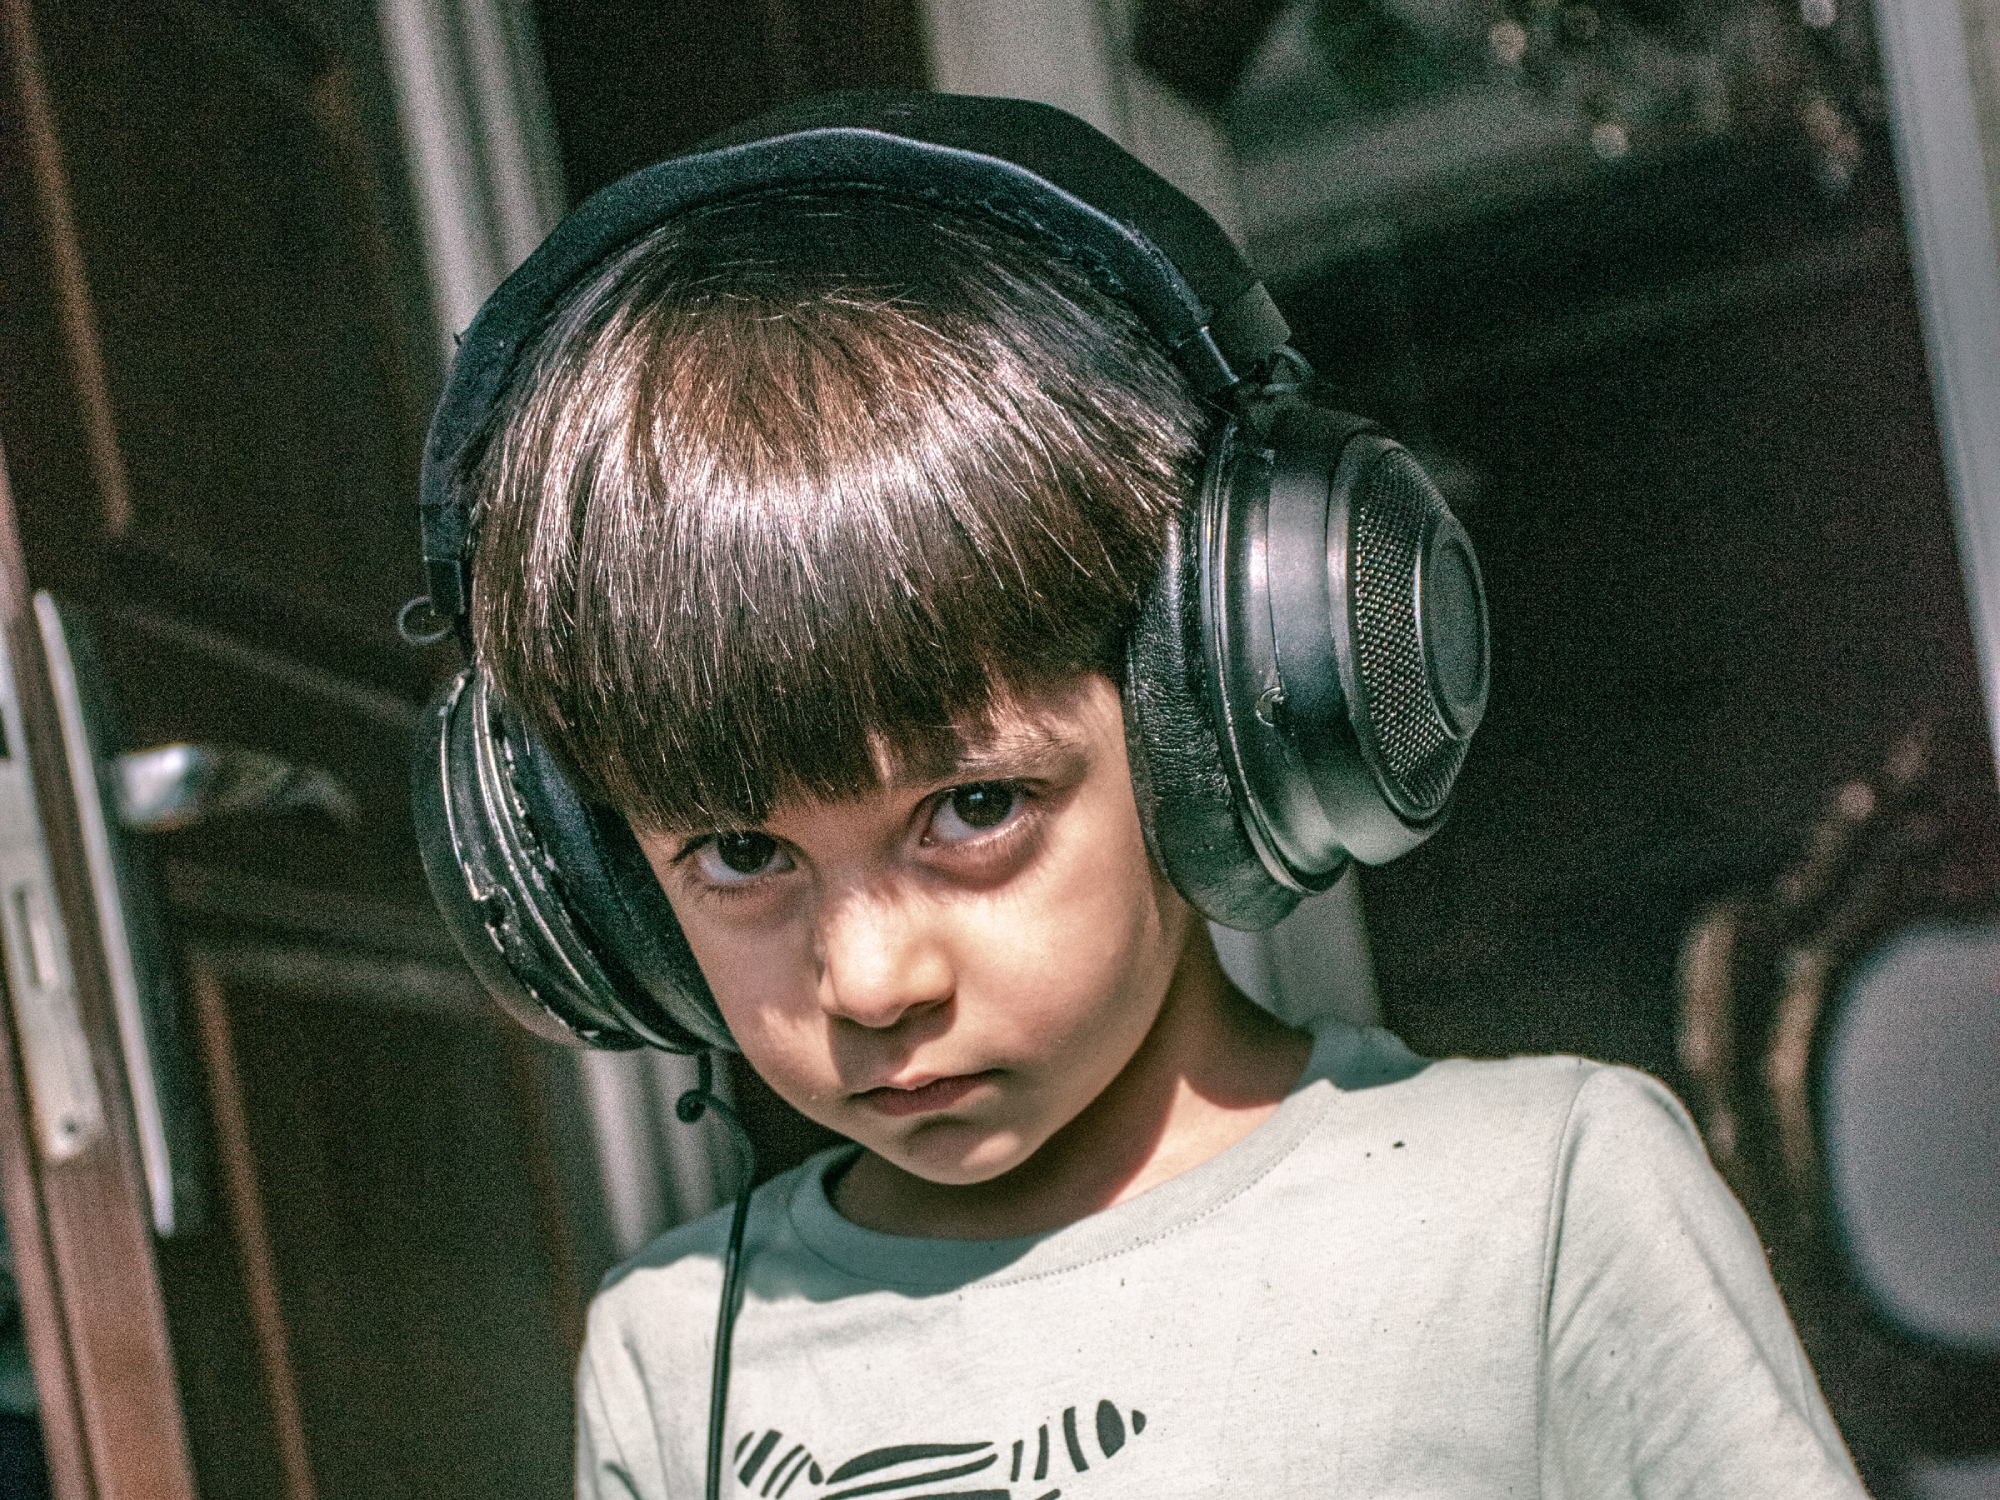 a child wearing large comfortable headphones